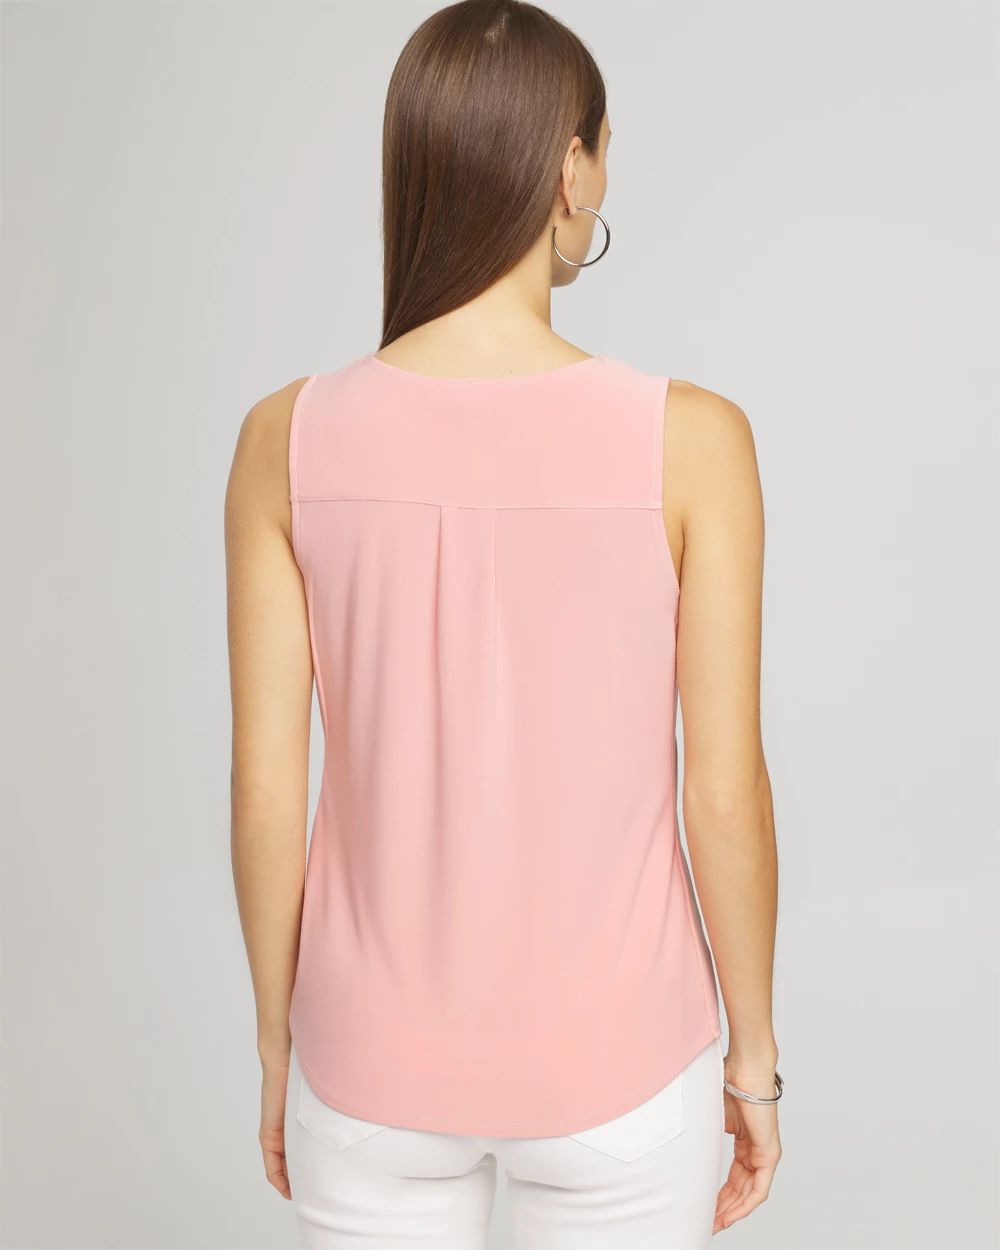 Matte Jersey Lace Notch Neck Tank click to view larger image.